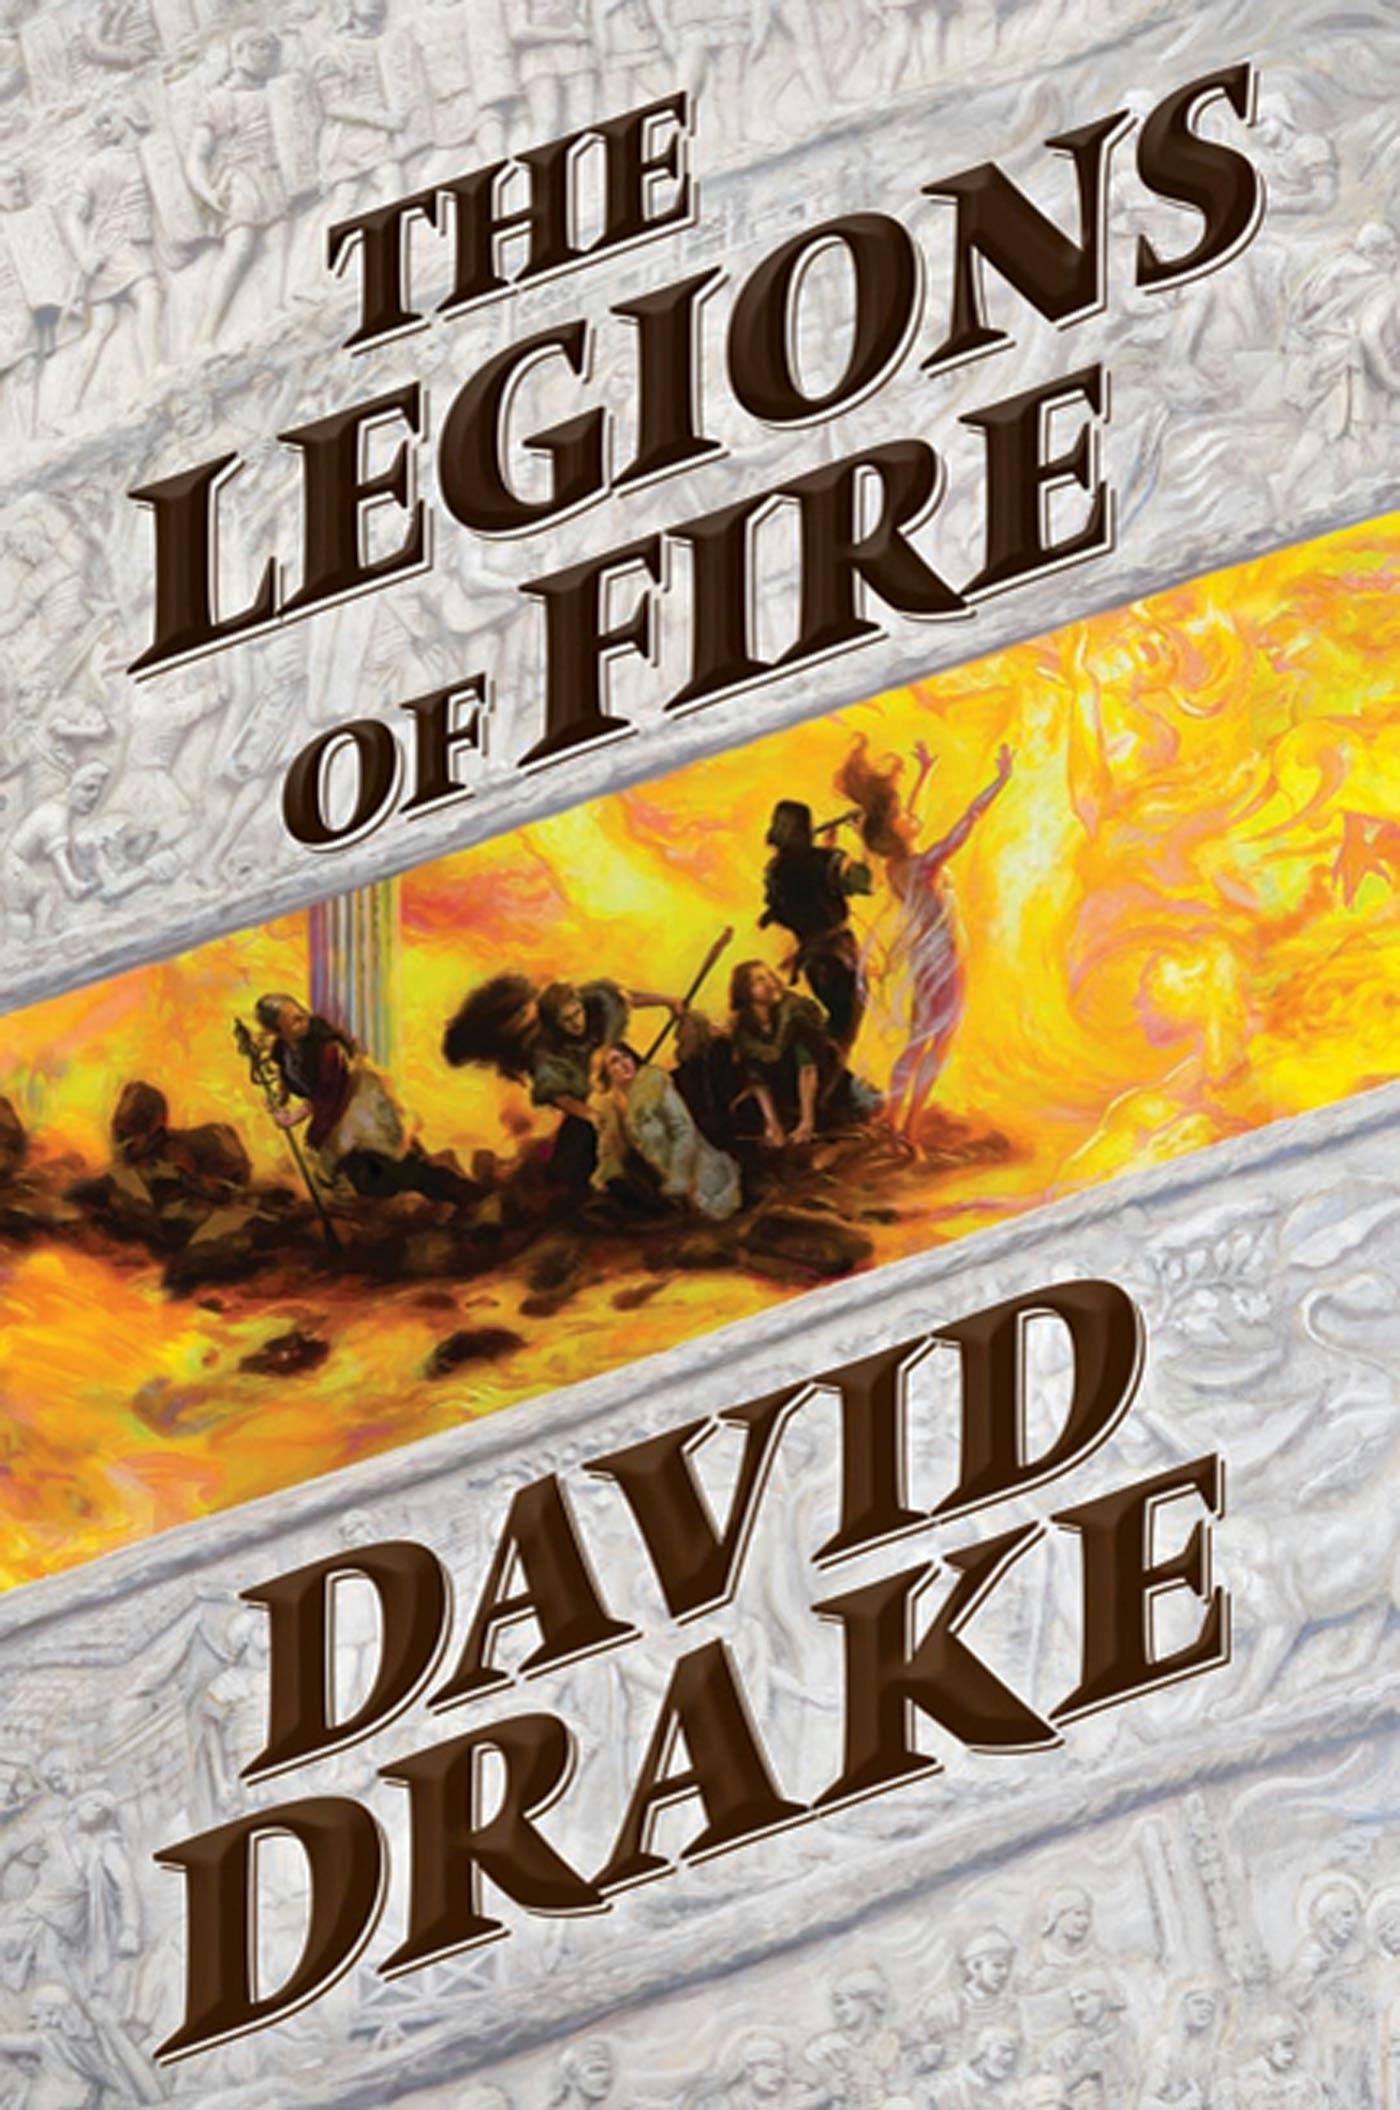 Cover for the book titled as: The Legions of Fire